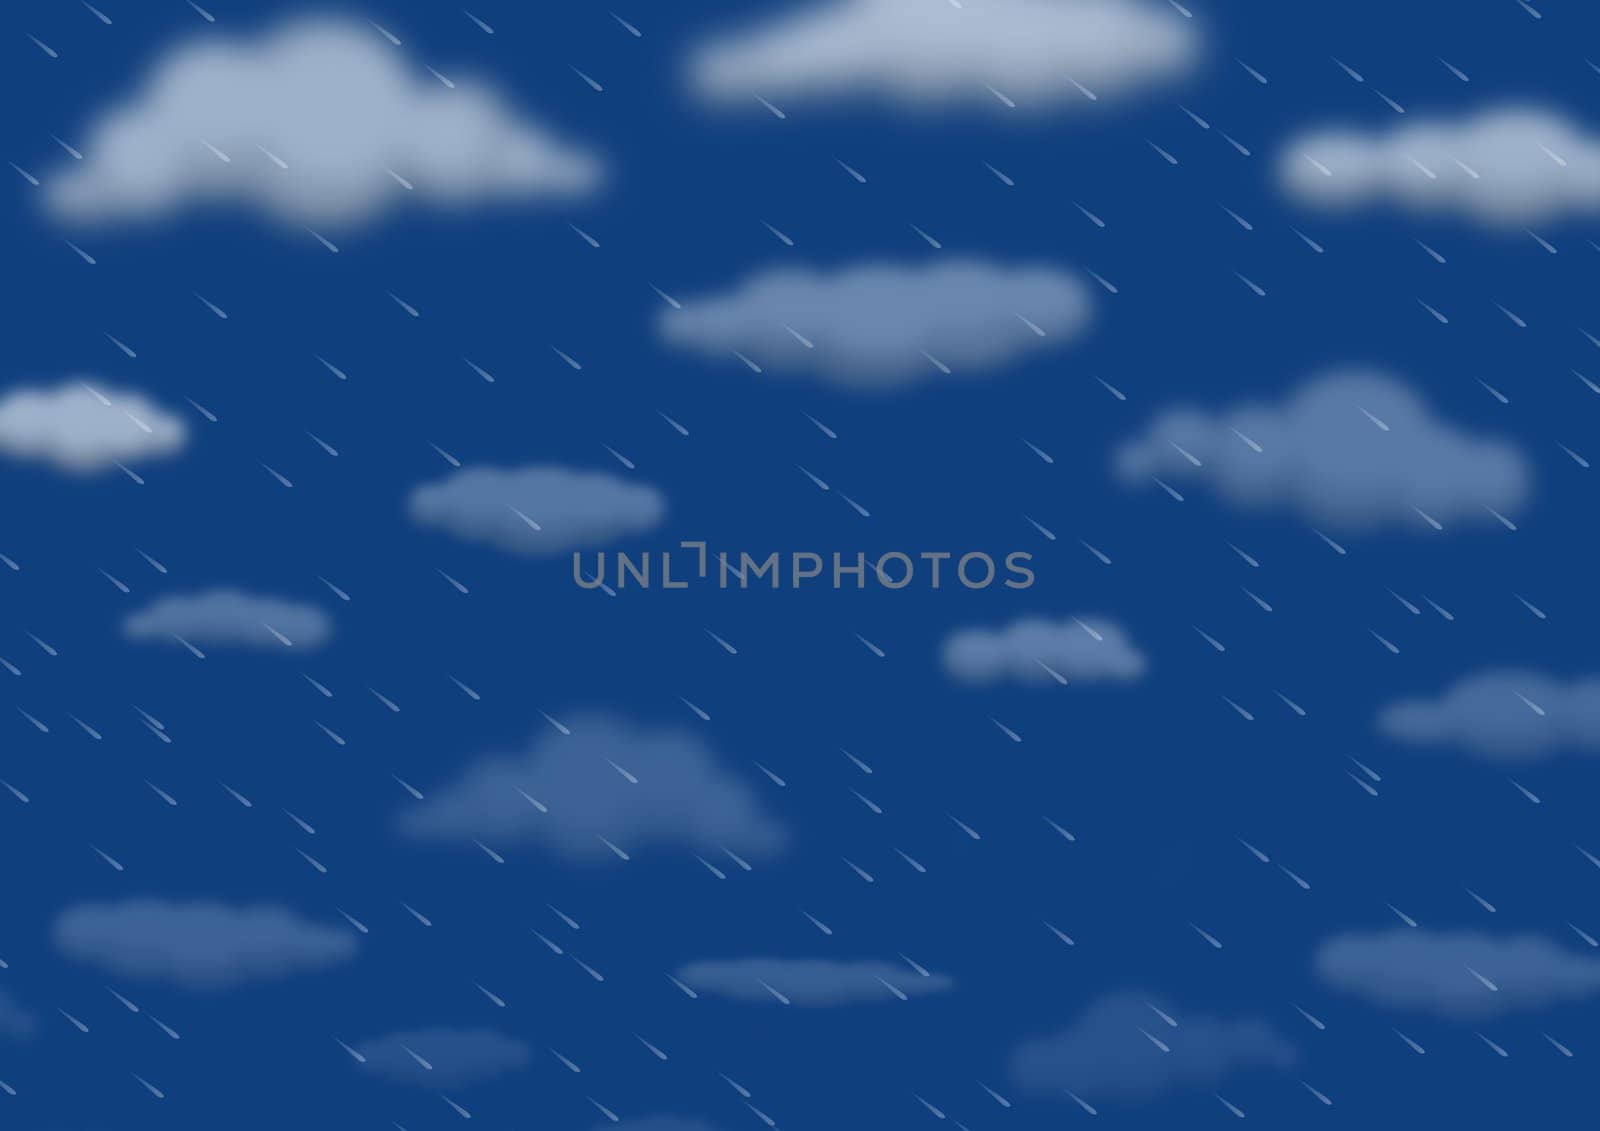 Illustration of a cloudy background with rain